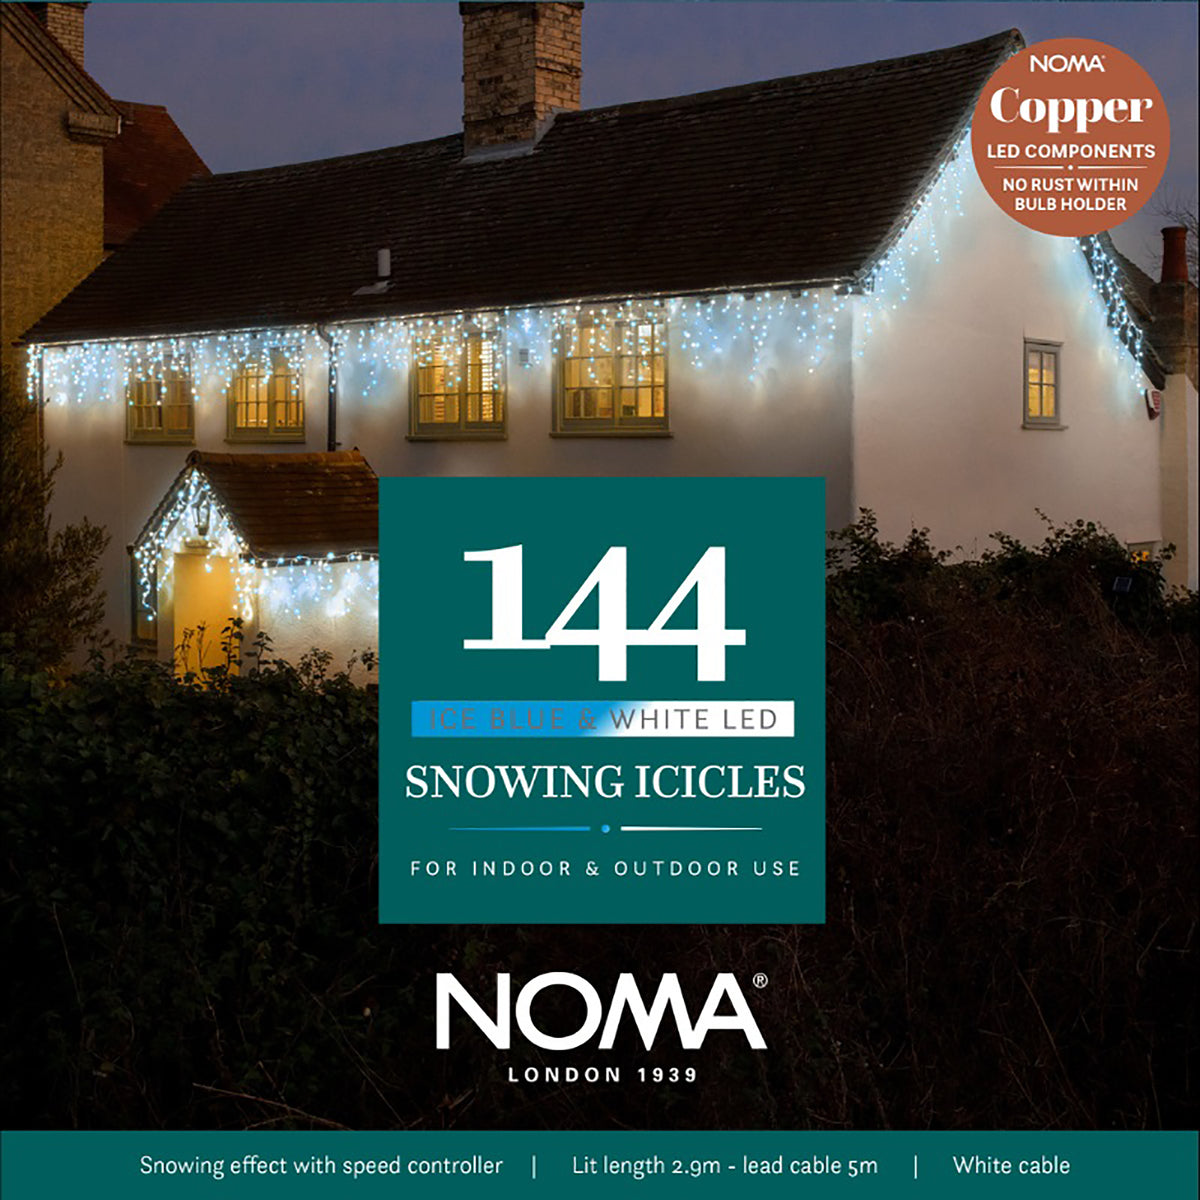 Noma Christmas 240, 360, 480, 720, 960 Snowing Icicle LED Lights with White Cable- White/ Ice Blue